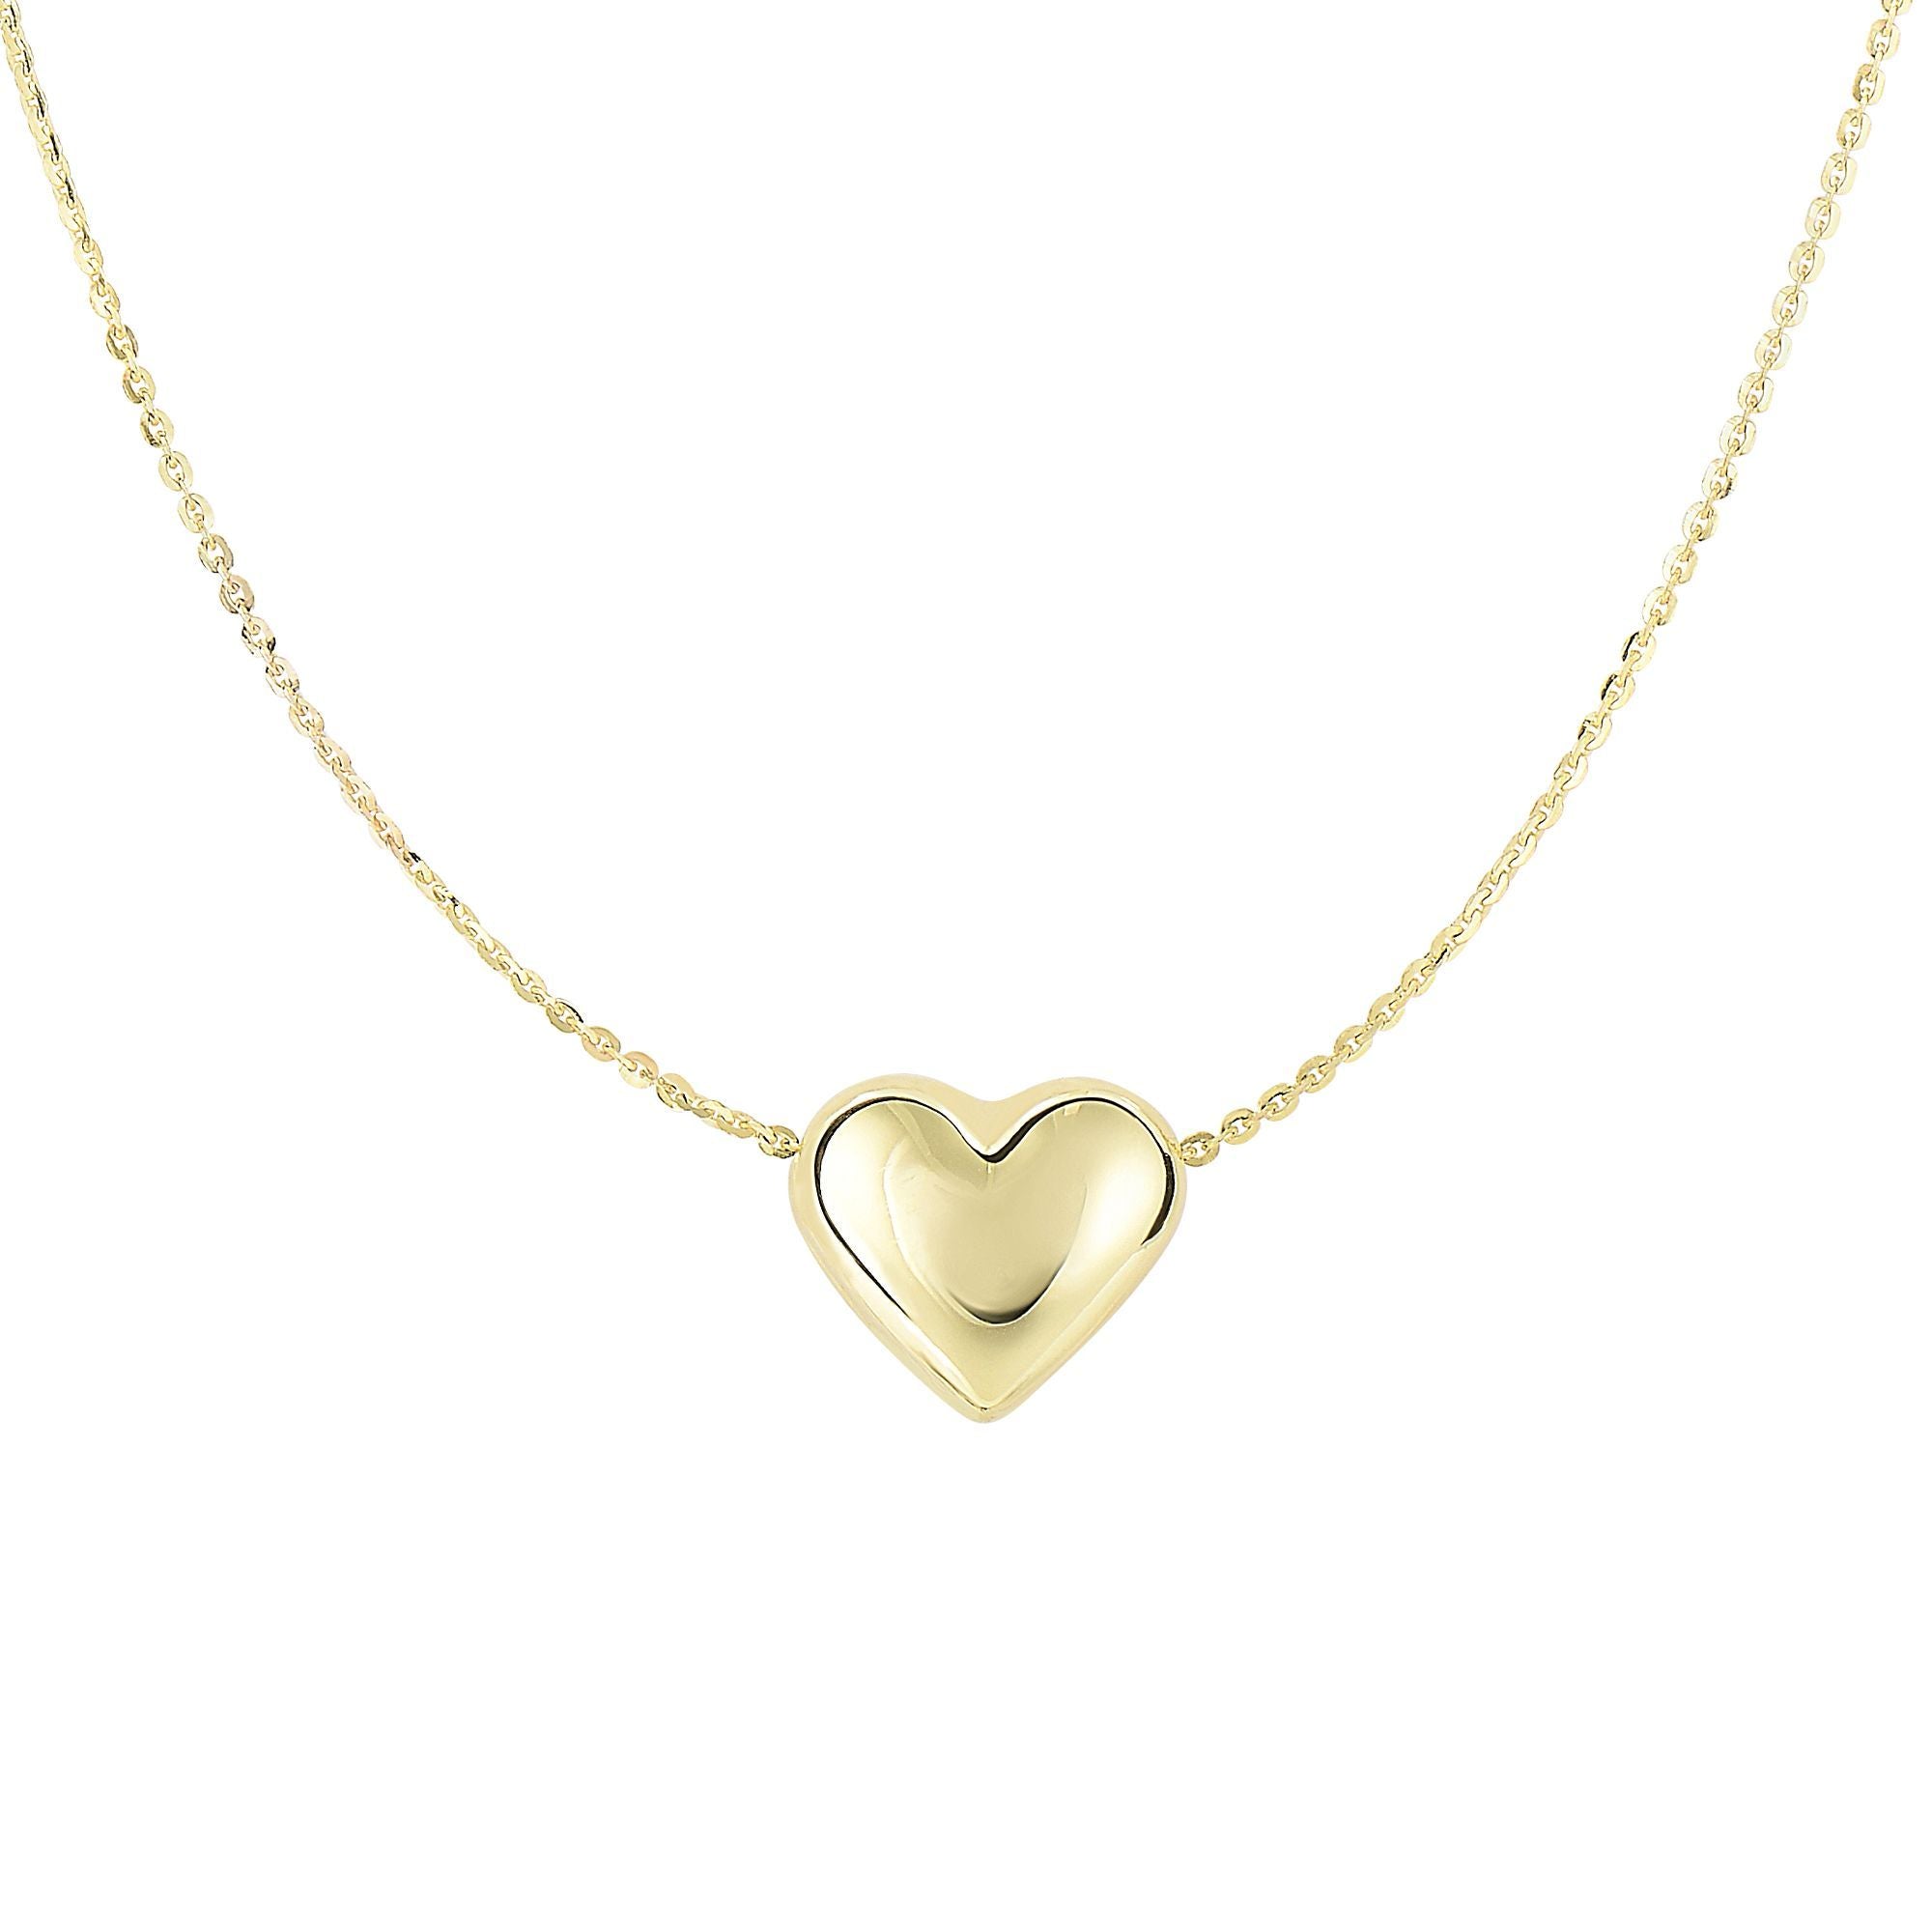 Minimalist Solid Gold Slide Puffed Heart Necklace - wingroupjewelry